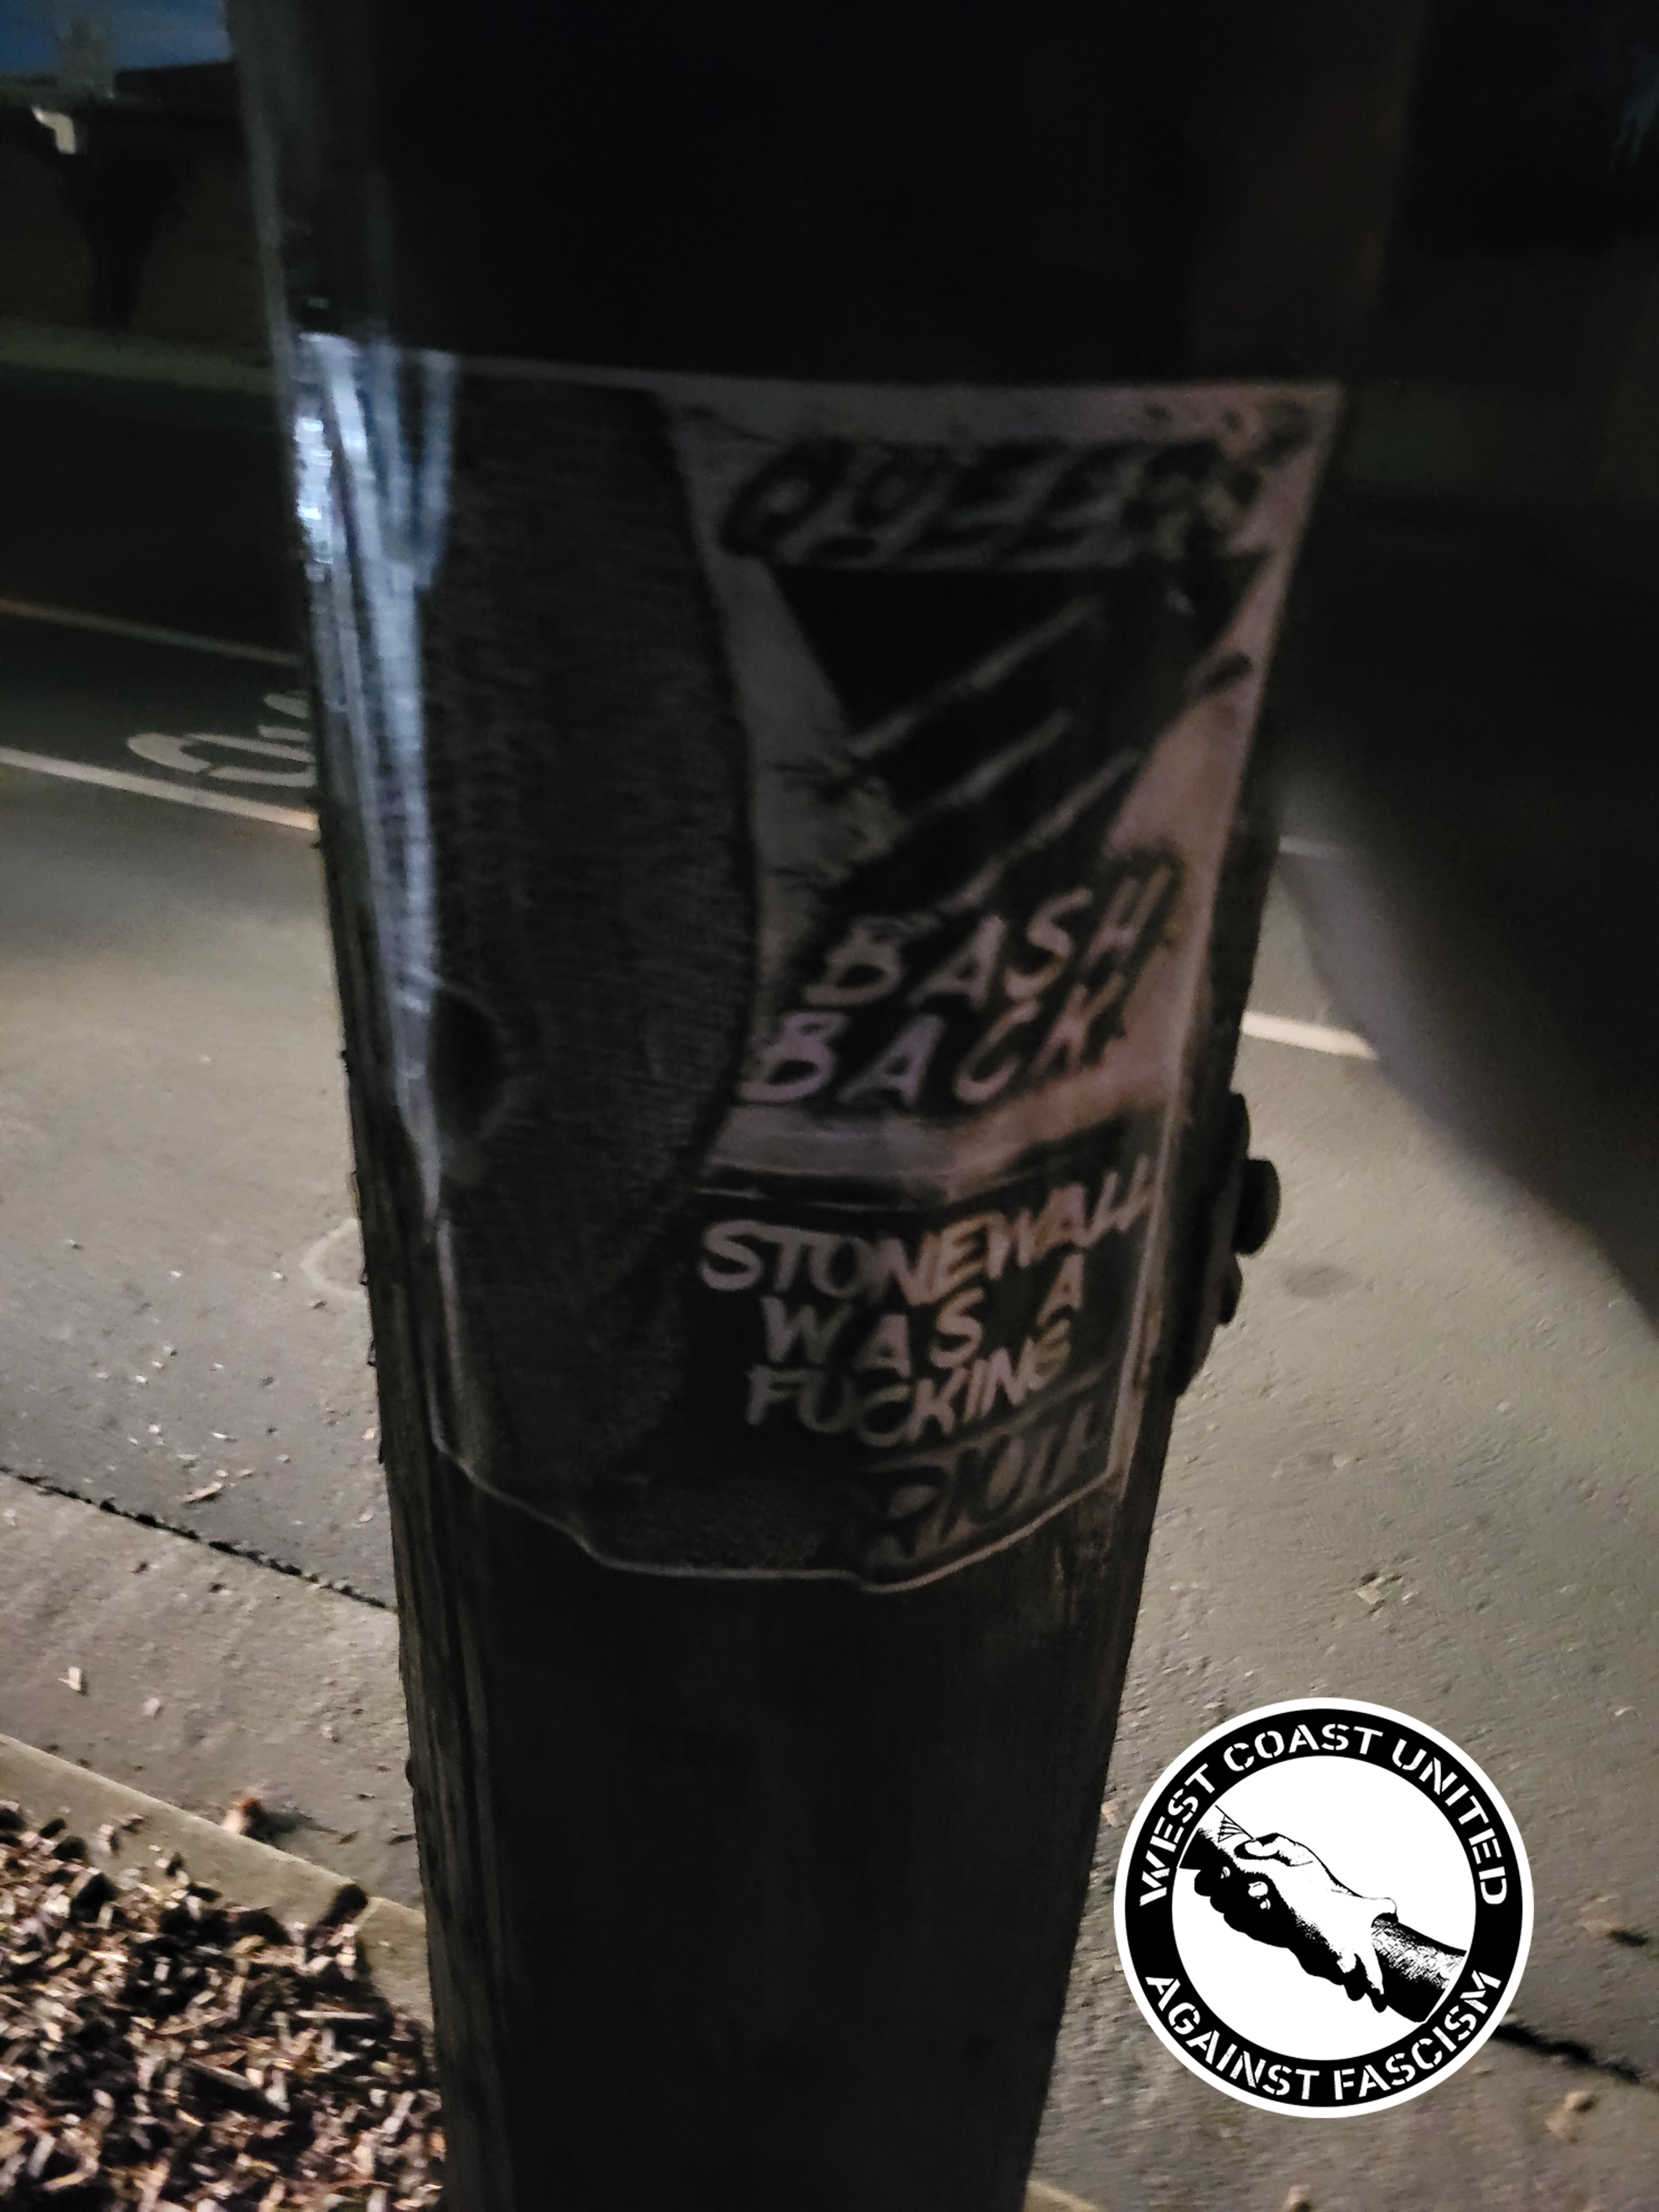 A wooden post has a flyer attached to it. It shows a ski-mask on half the page. On the other half, it reads "Queers bash back" with a traingle with three bats going across it. The bats have spikes. Below it reads "Stonewall was a fucking riot!"